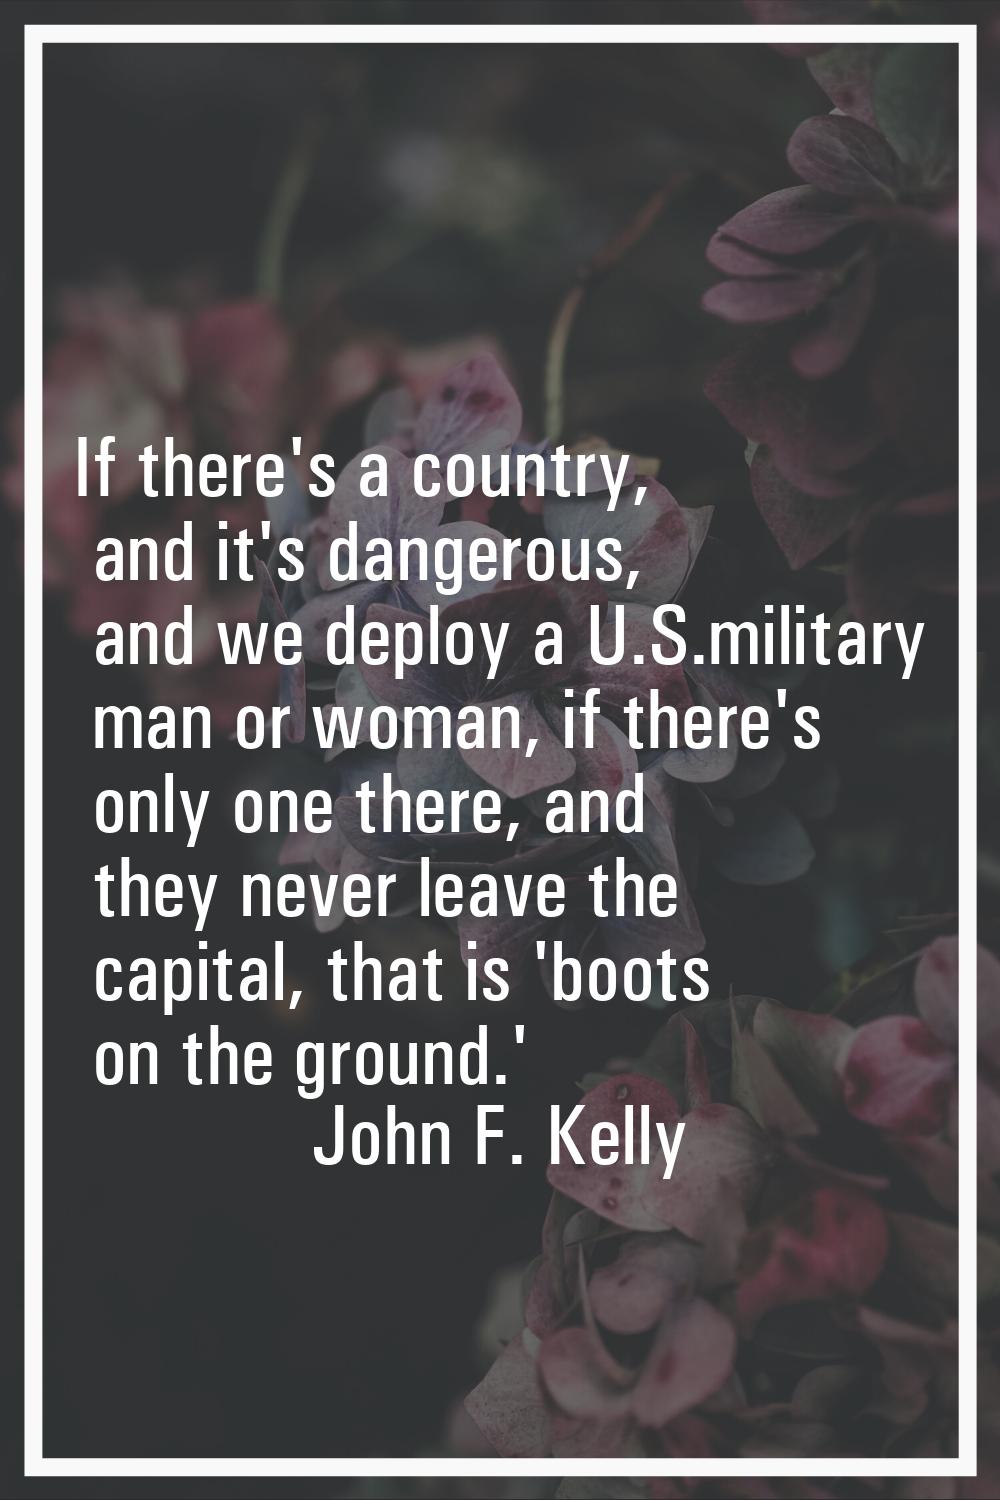 If there's a country, and it's dangerous, and we deploy a U.S.military man or woman, if there's onl